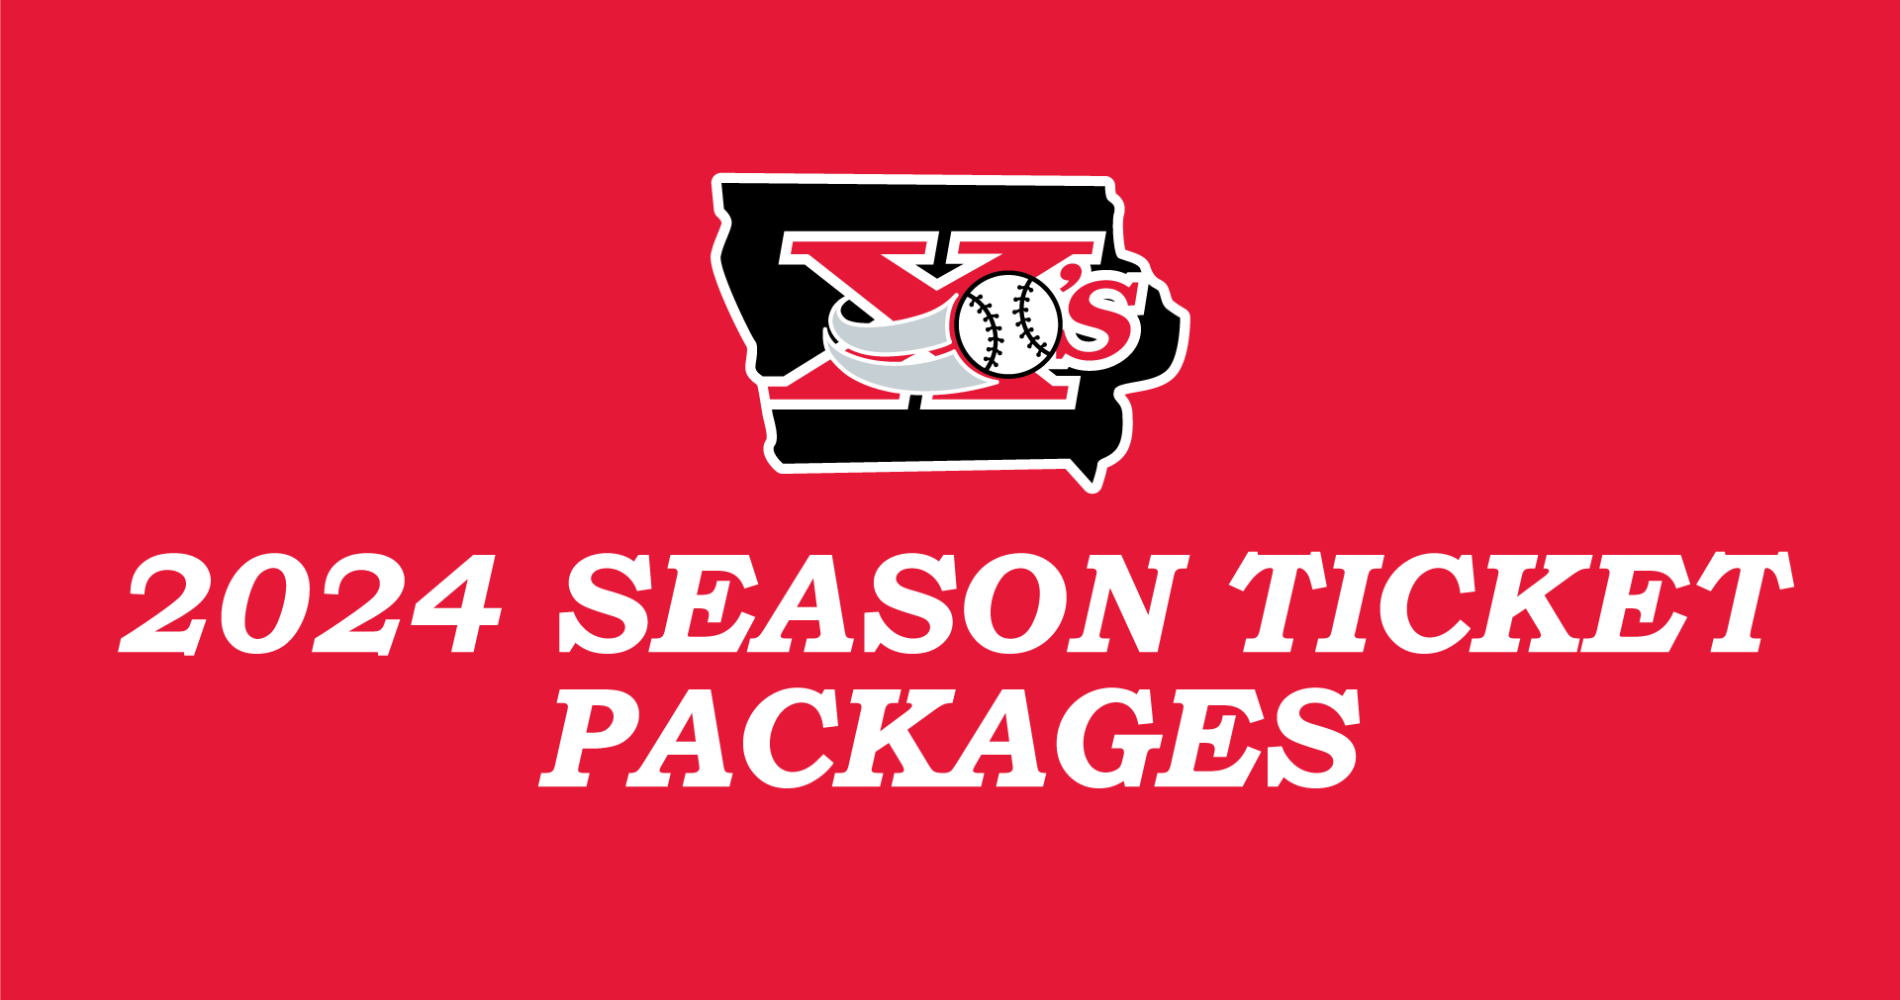 Ticket Packages Now For Sale